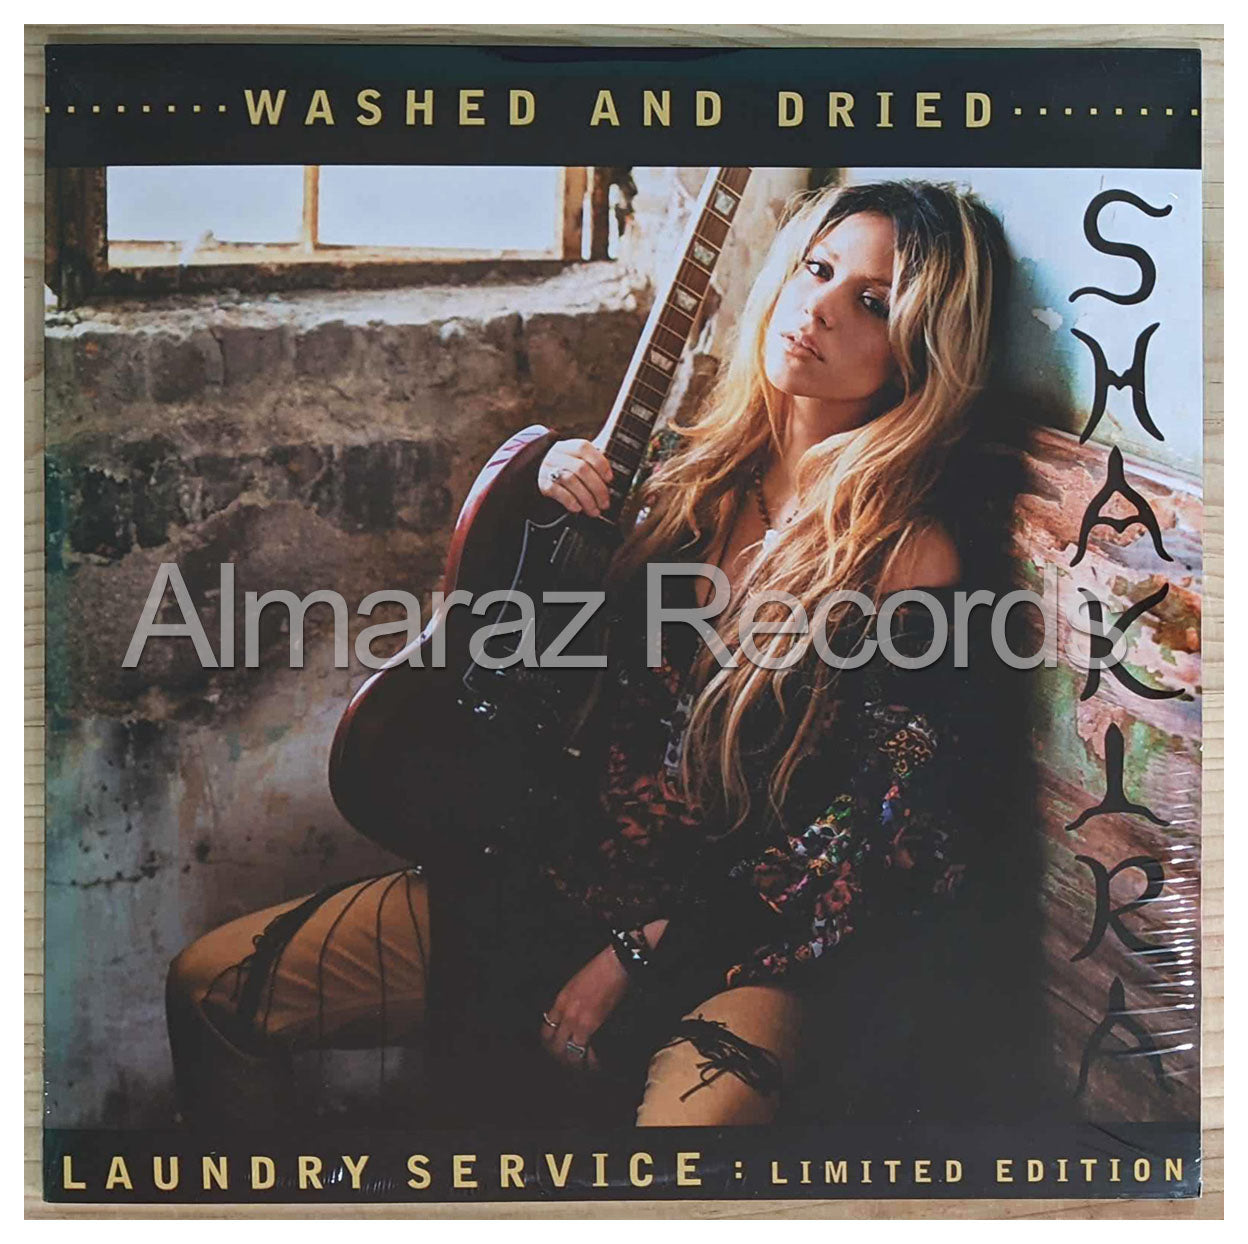 Shakira Laundry Service Washed And Dried Limited Silver/Gold Vinyl LP